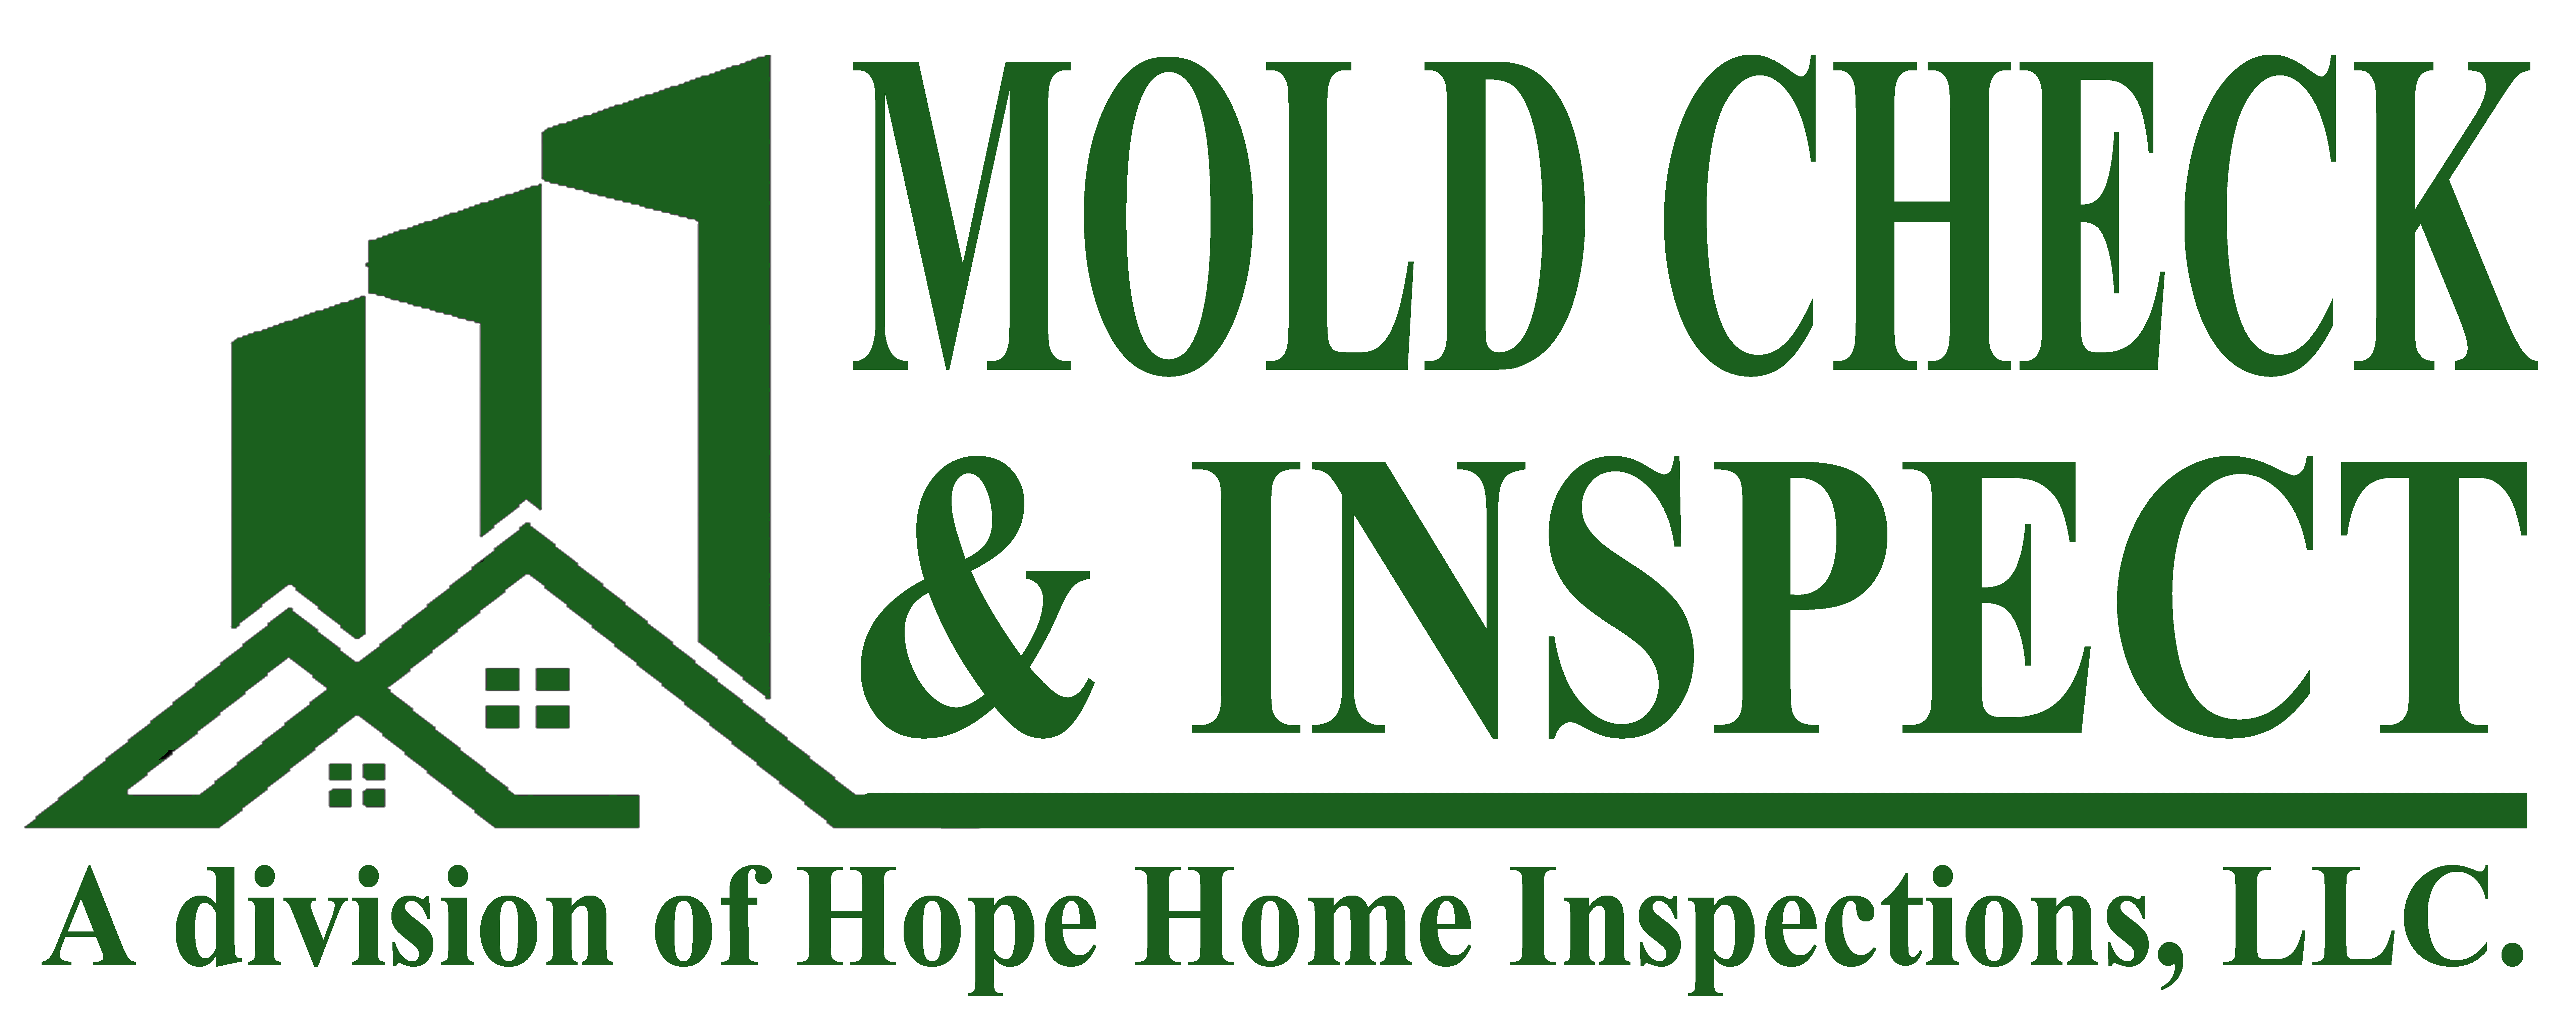 Logo for Mold Check and Inspect: Silhouette of a home and office buildings, symbolizing comprehensive mold inspection for residential and commercial properties.